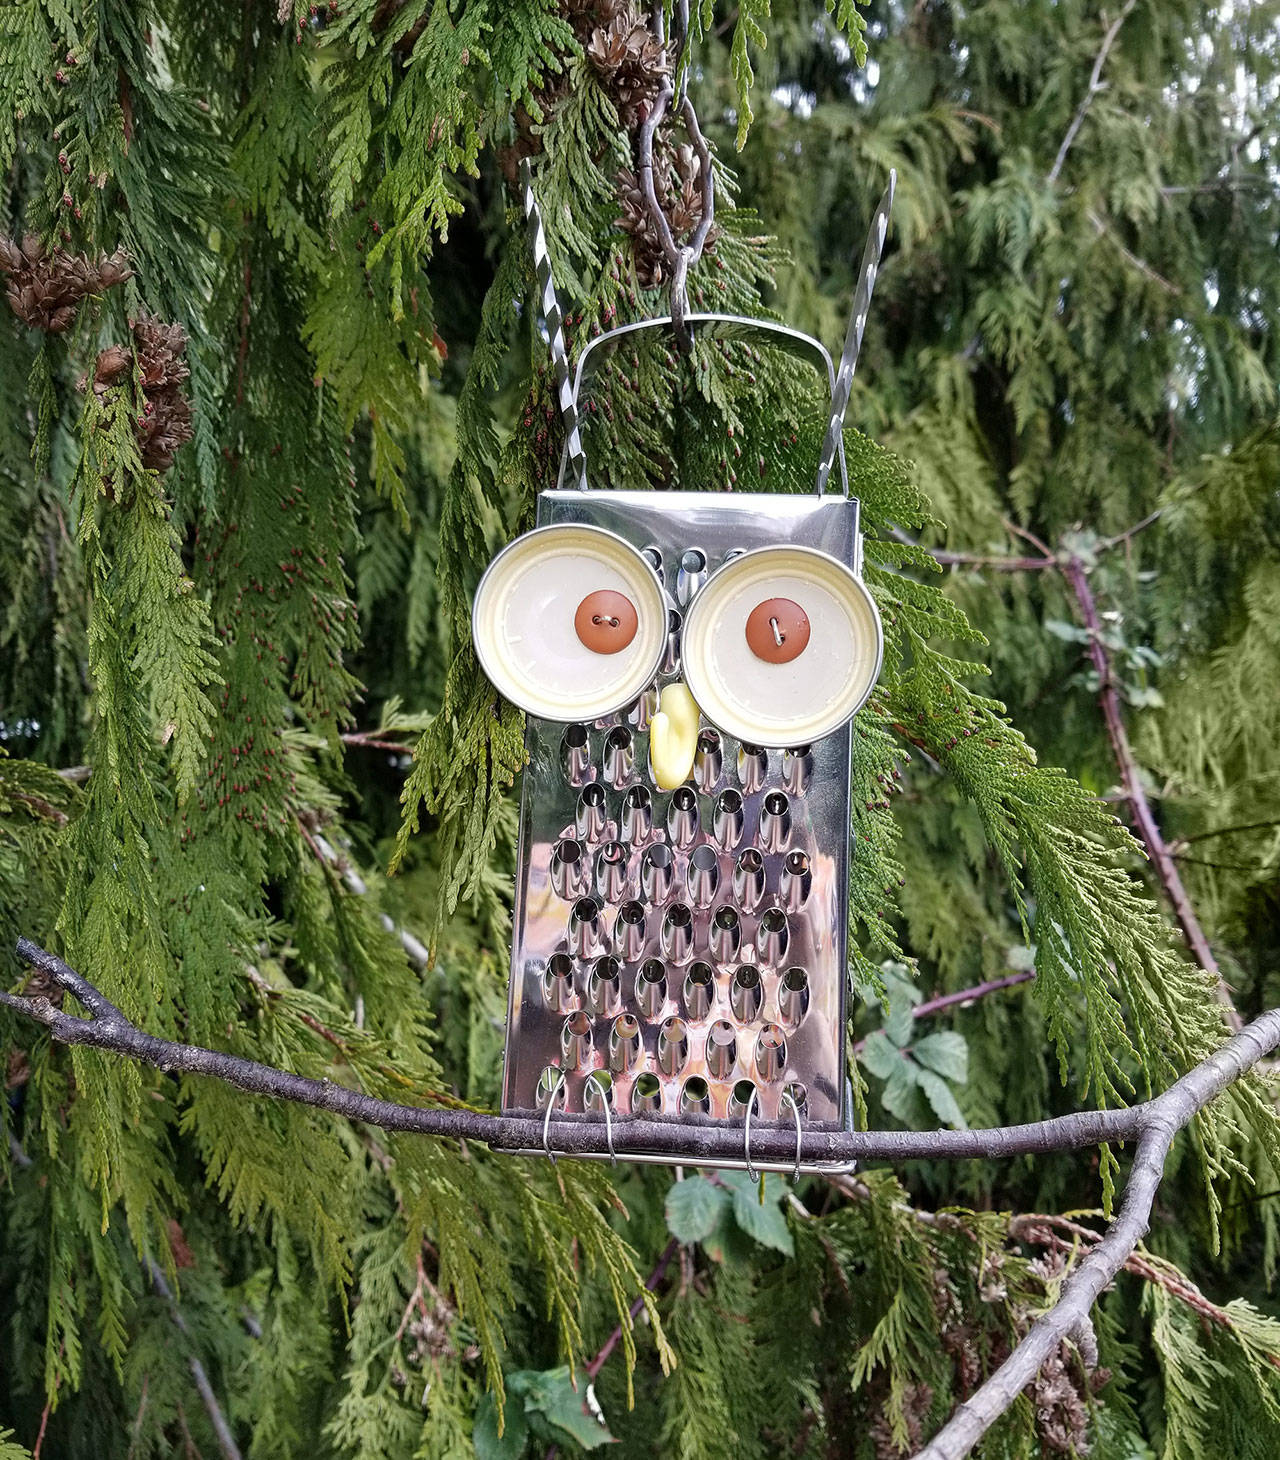 Workshop turns cheese graters to owls